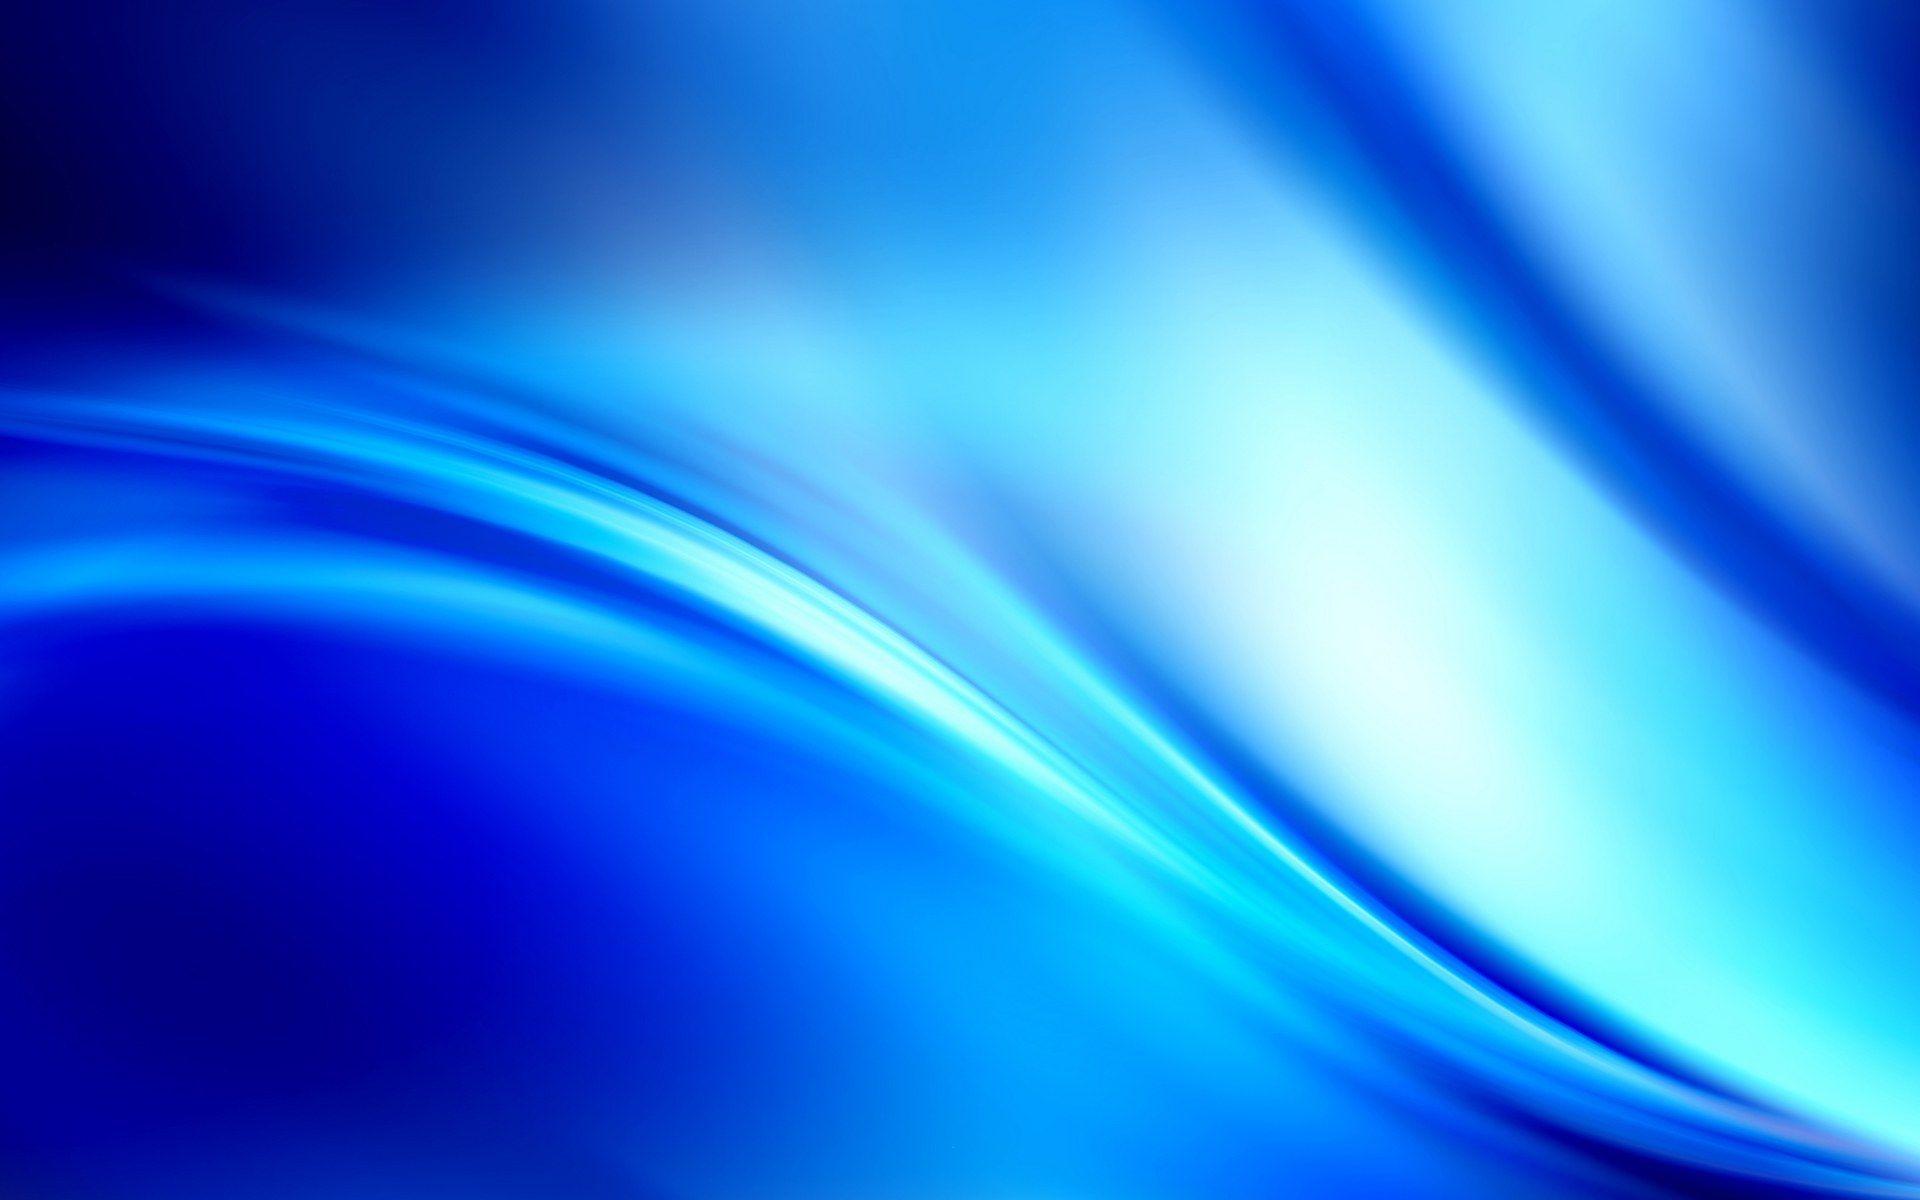 Abstract Blue Light Background HD Wallpaper. Cool